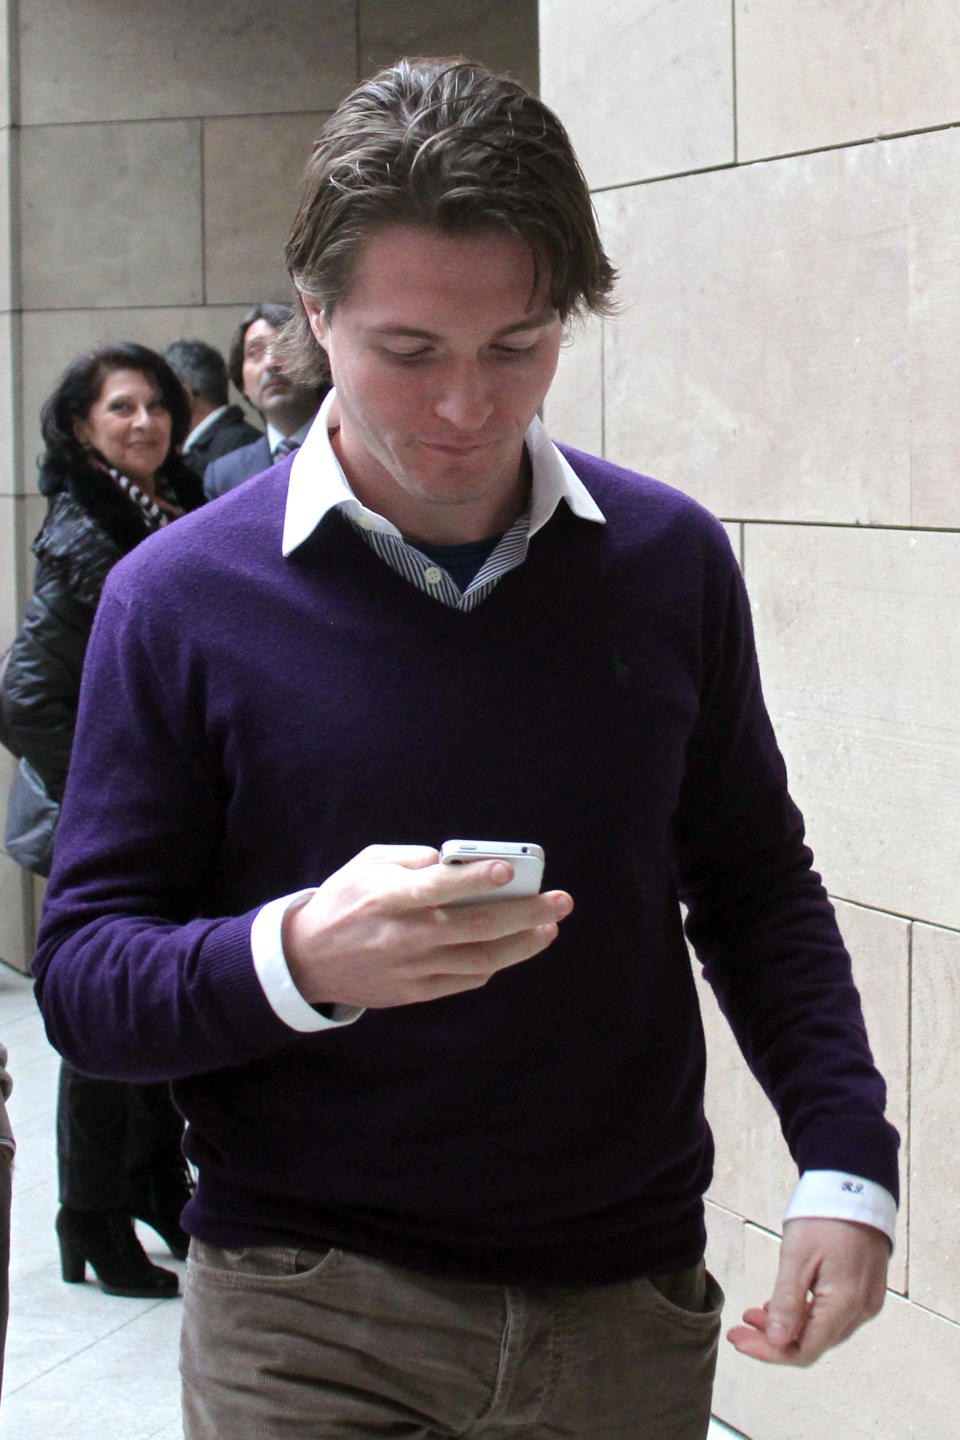 Raffaele Sollecito checks his smart phone as he enters the Florence court, Italy, Thursday, Jan. 9, 2013. The defense lawyer for the former boyfriend of U.S. exchange student Amanda Knox told an appeals court Thursday that the young lovers were blamed by authorities for the murder of British student Meredith Kercher to calm any fears that a monster was loose in their Italian university town. Defender Giulia Bongiorno said her client, Raffaele Sollecito, and Knox were identified as suspects in a "record" four days after the murder in the picturesque central town of Perugia because authorities "did not want to think that a stranger, a monster, could have entered a house and murdered a student." (AP Photo/Matteo Bovo, Lapresse)